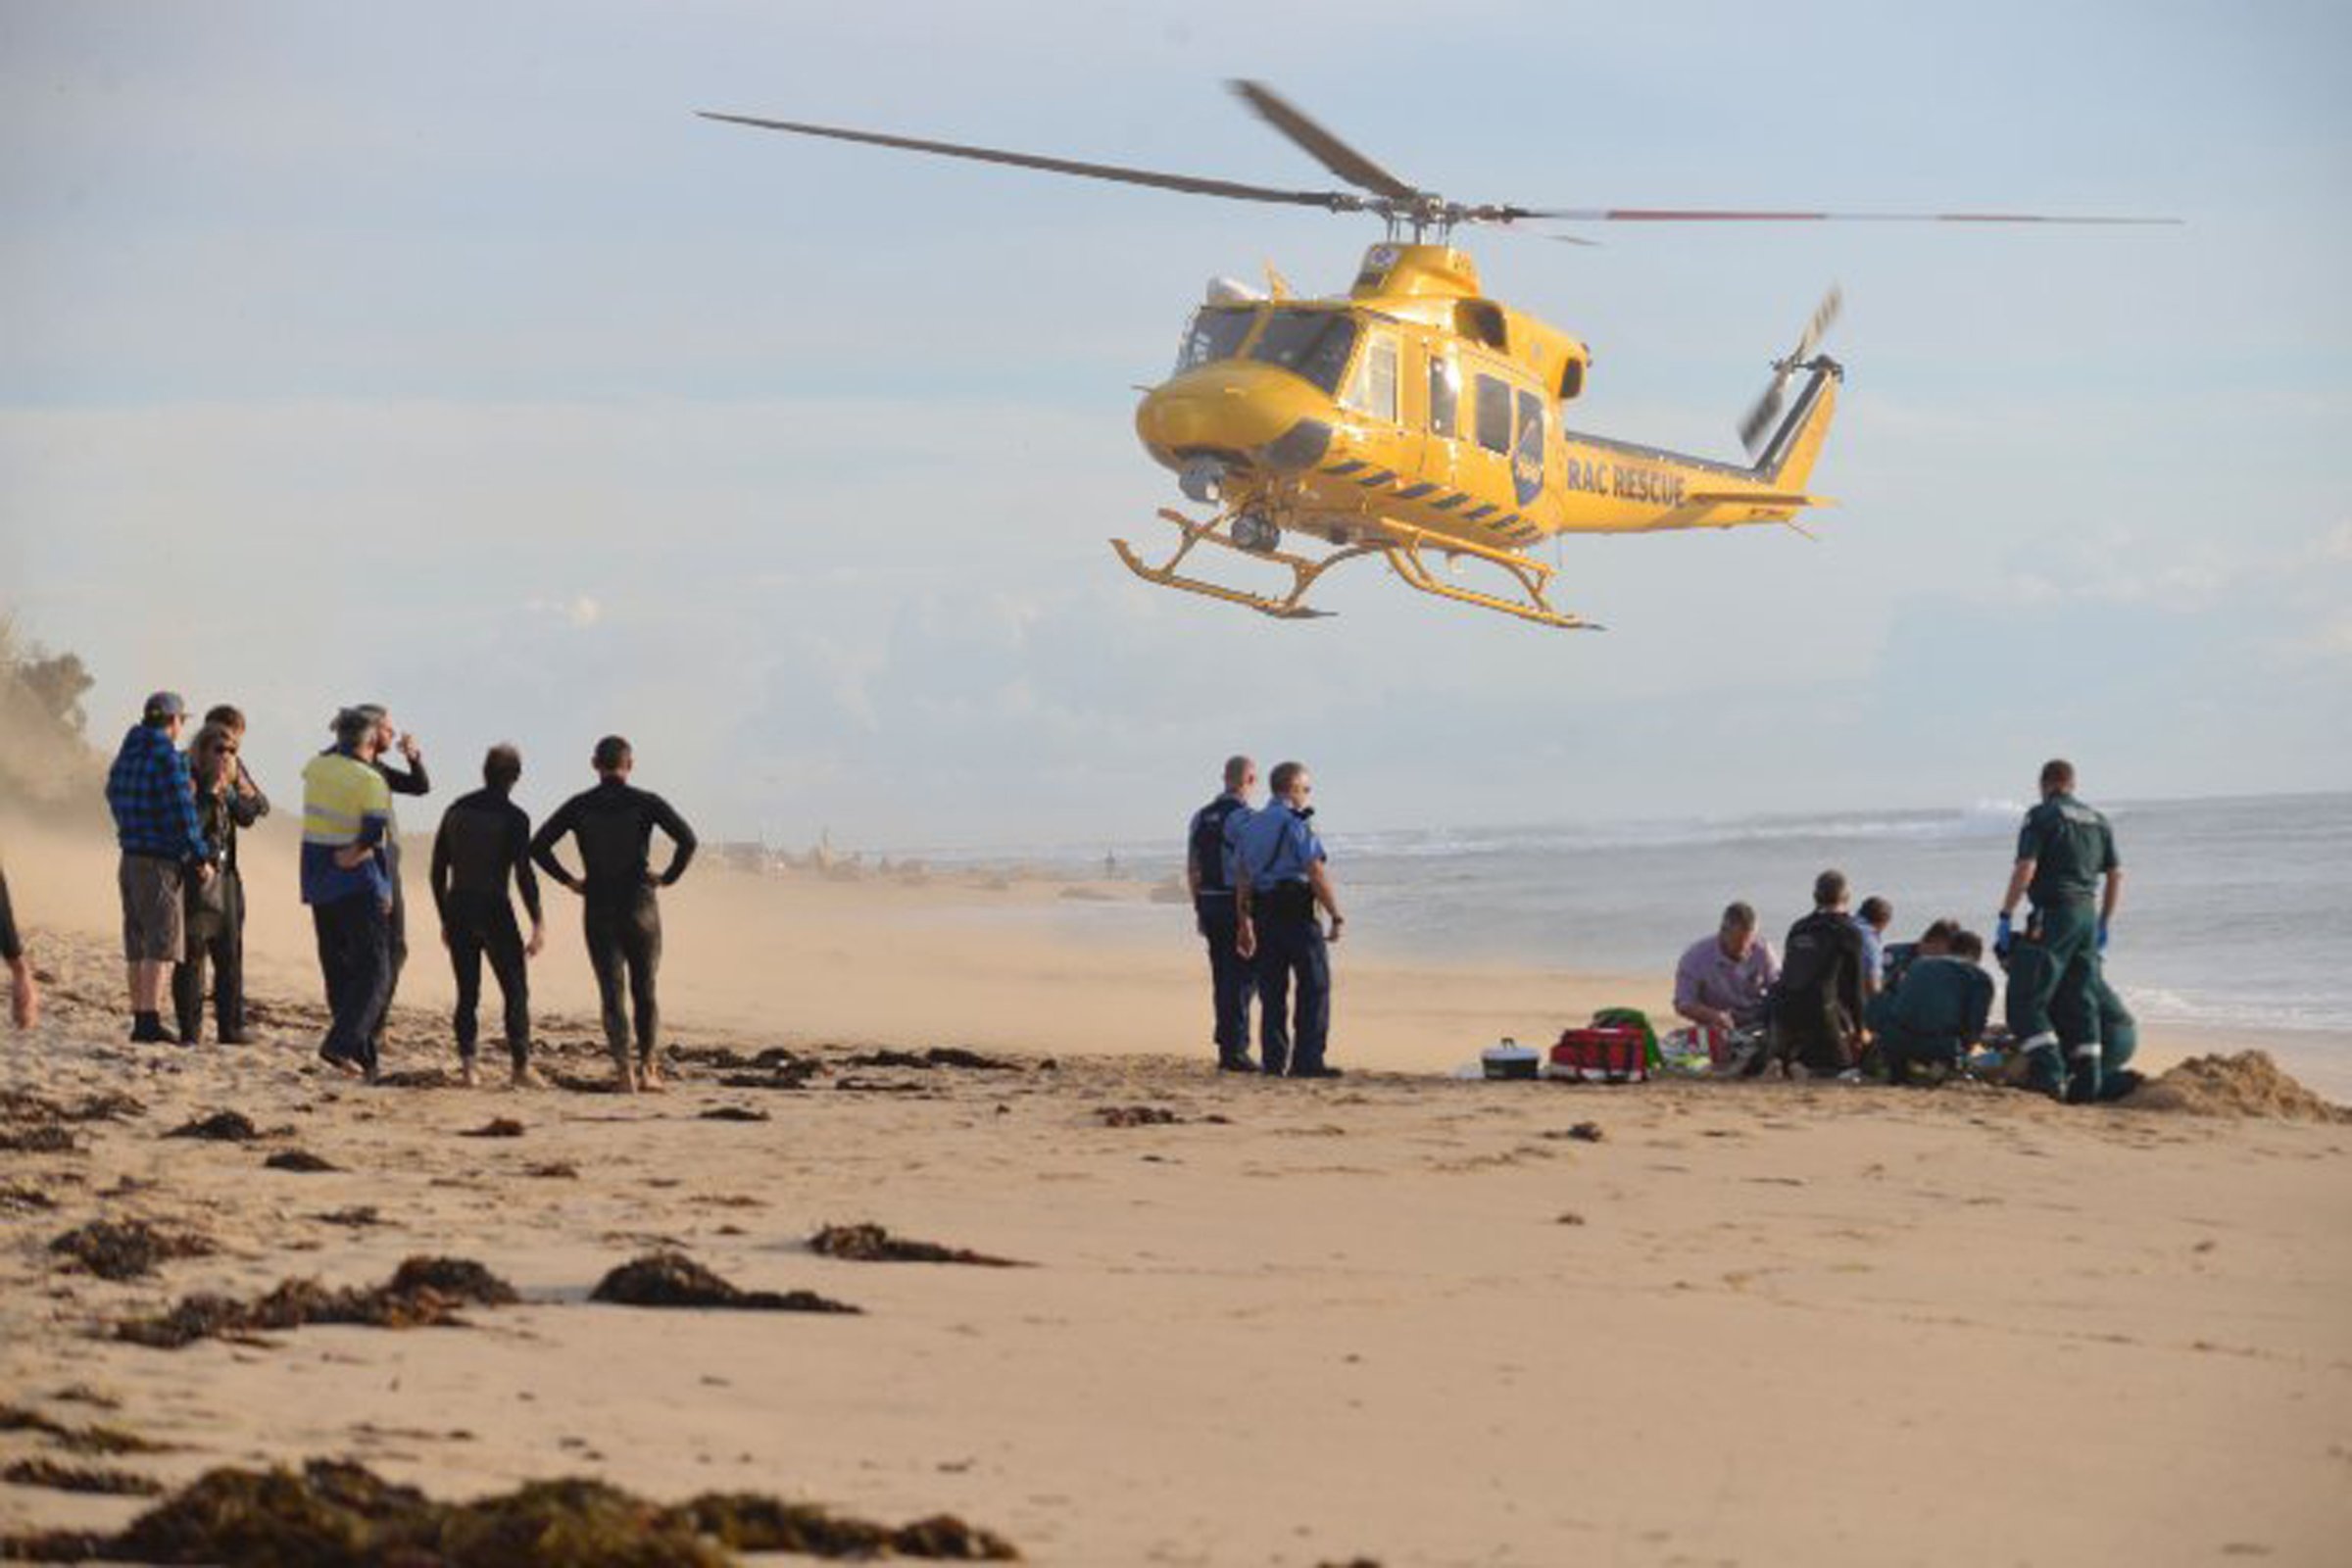 A photo taken on 31 May, 2016, shows a rescue helicopter arriving to transport a critically injured surfer after a shark ripped off his leg in an attack in Australia's west with witnesses recounting how "all hell broke loose" as his board was snapped in half. The attack happened at Falcon Beach, a suburb south of Perth, not long after Surf Life Saving WA, a volunteer non-profit organisation, tweeted that a shark, believed to be a great white, had been sighted in the area. / AFP PHOTO / AFP PHOTO AND MANDURAH MAIL / MARTA PASCUAL JUANOLA / - Australia OUT / ----EDITORS NOTE ----RESTRICTED TO EDITORIAL USE MANDATORY CREDIT " AFP PHOTO / MANDURAH MAIL/MARTA PASCUAL JUANOLA" NO MARKETING NO ADVERTISING CAMPAIGNS - DISTRIBUTED AS A SERVICE TO CLIENTS - NO ARCHIVESMARTA PASCUAL JUANOLA/AFP/Getty Images